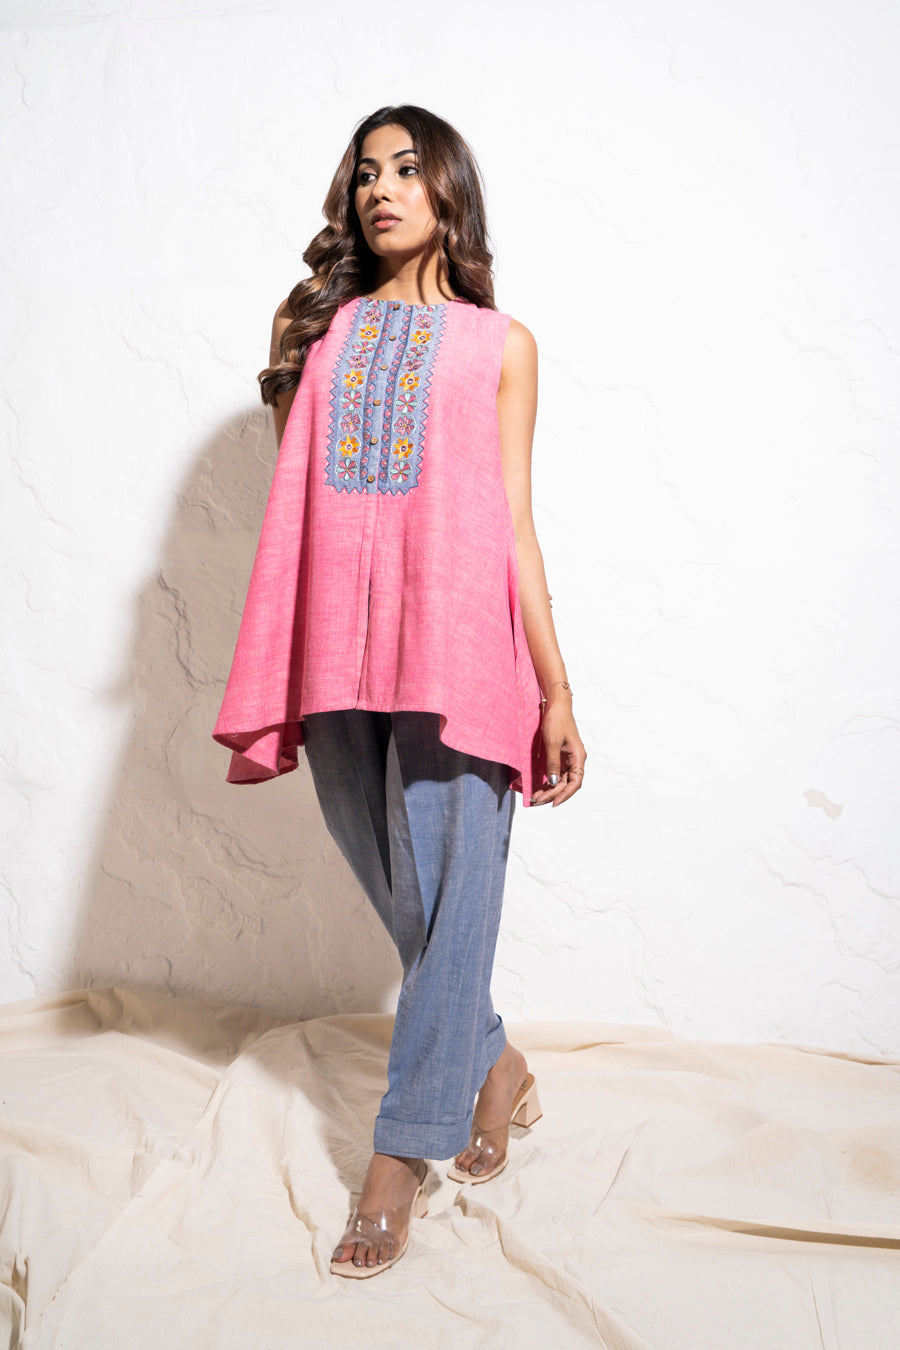 Embroidered Yoke Handwoven Berry Pink Top